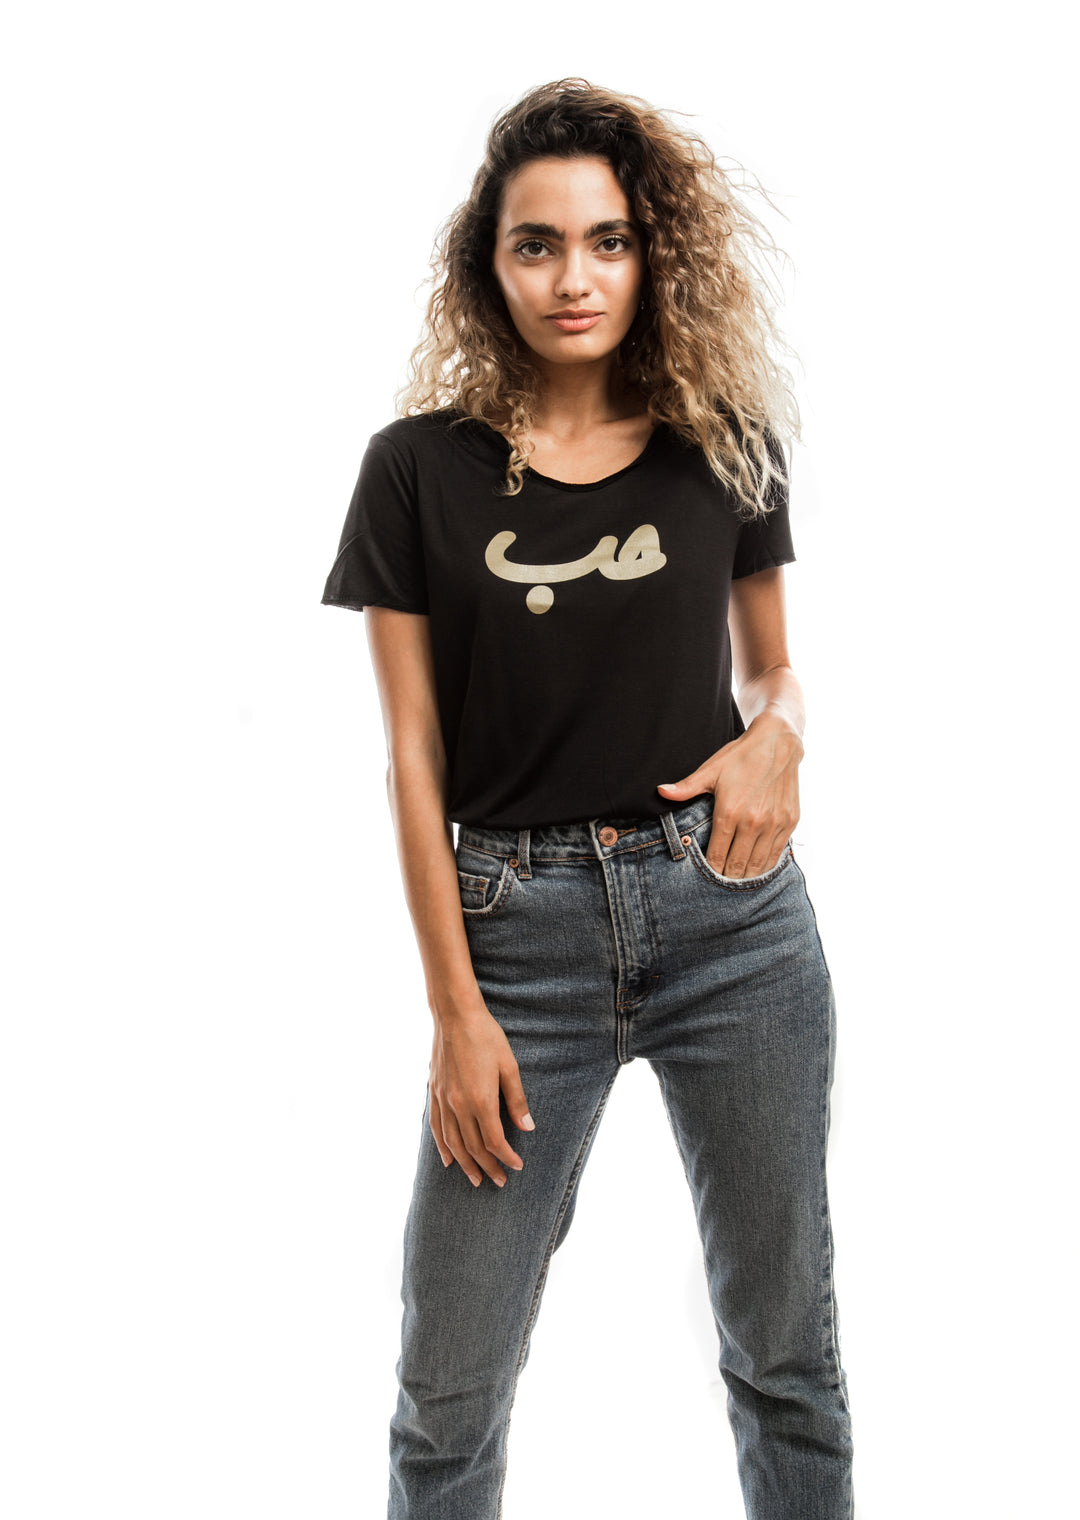 Young adult female wearing black T-shirt with Hobb written in Arabic حب and printed in gold silkscreen in the center of the T-shirt along with jeans.